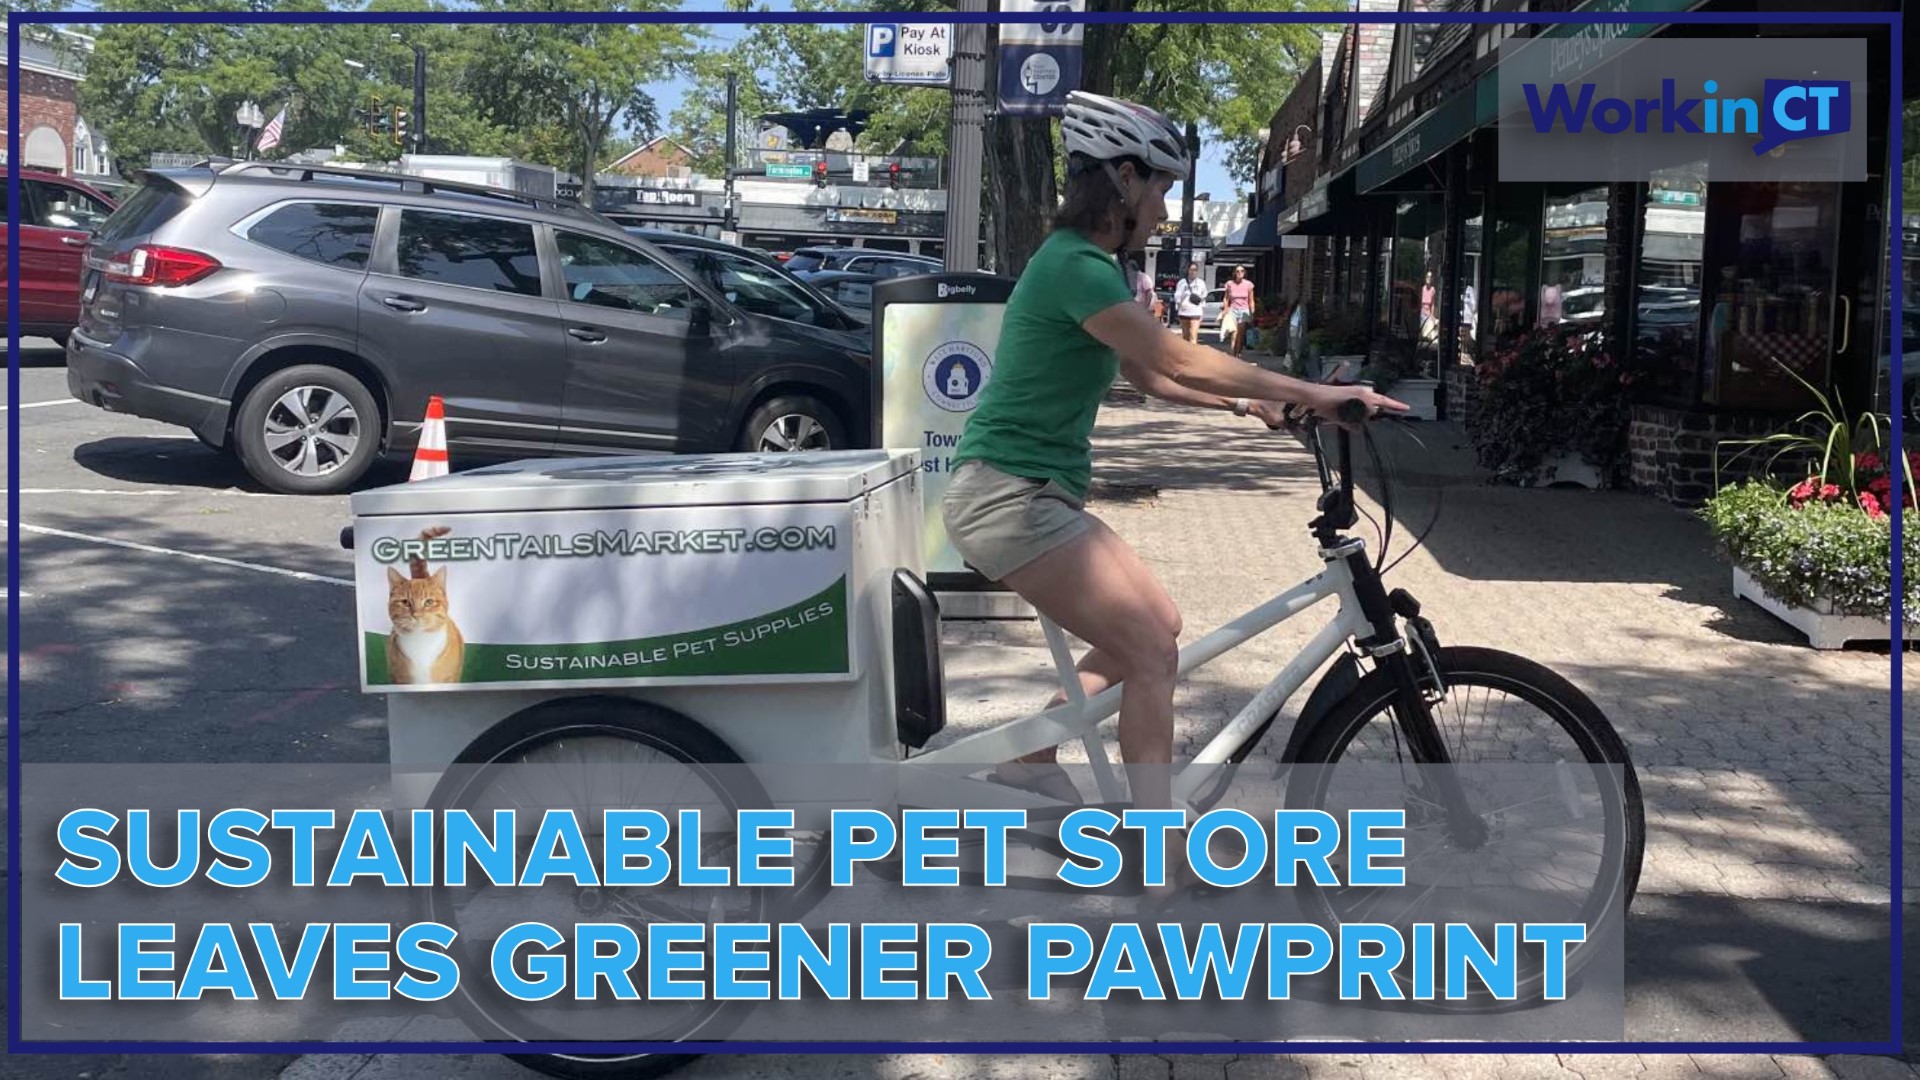 One local family-owned pet store is cleaning up the planet one pet at a time.